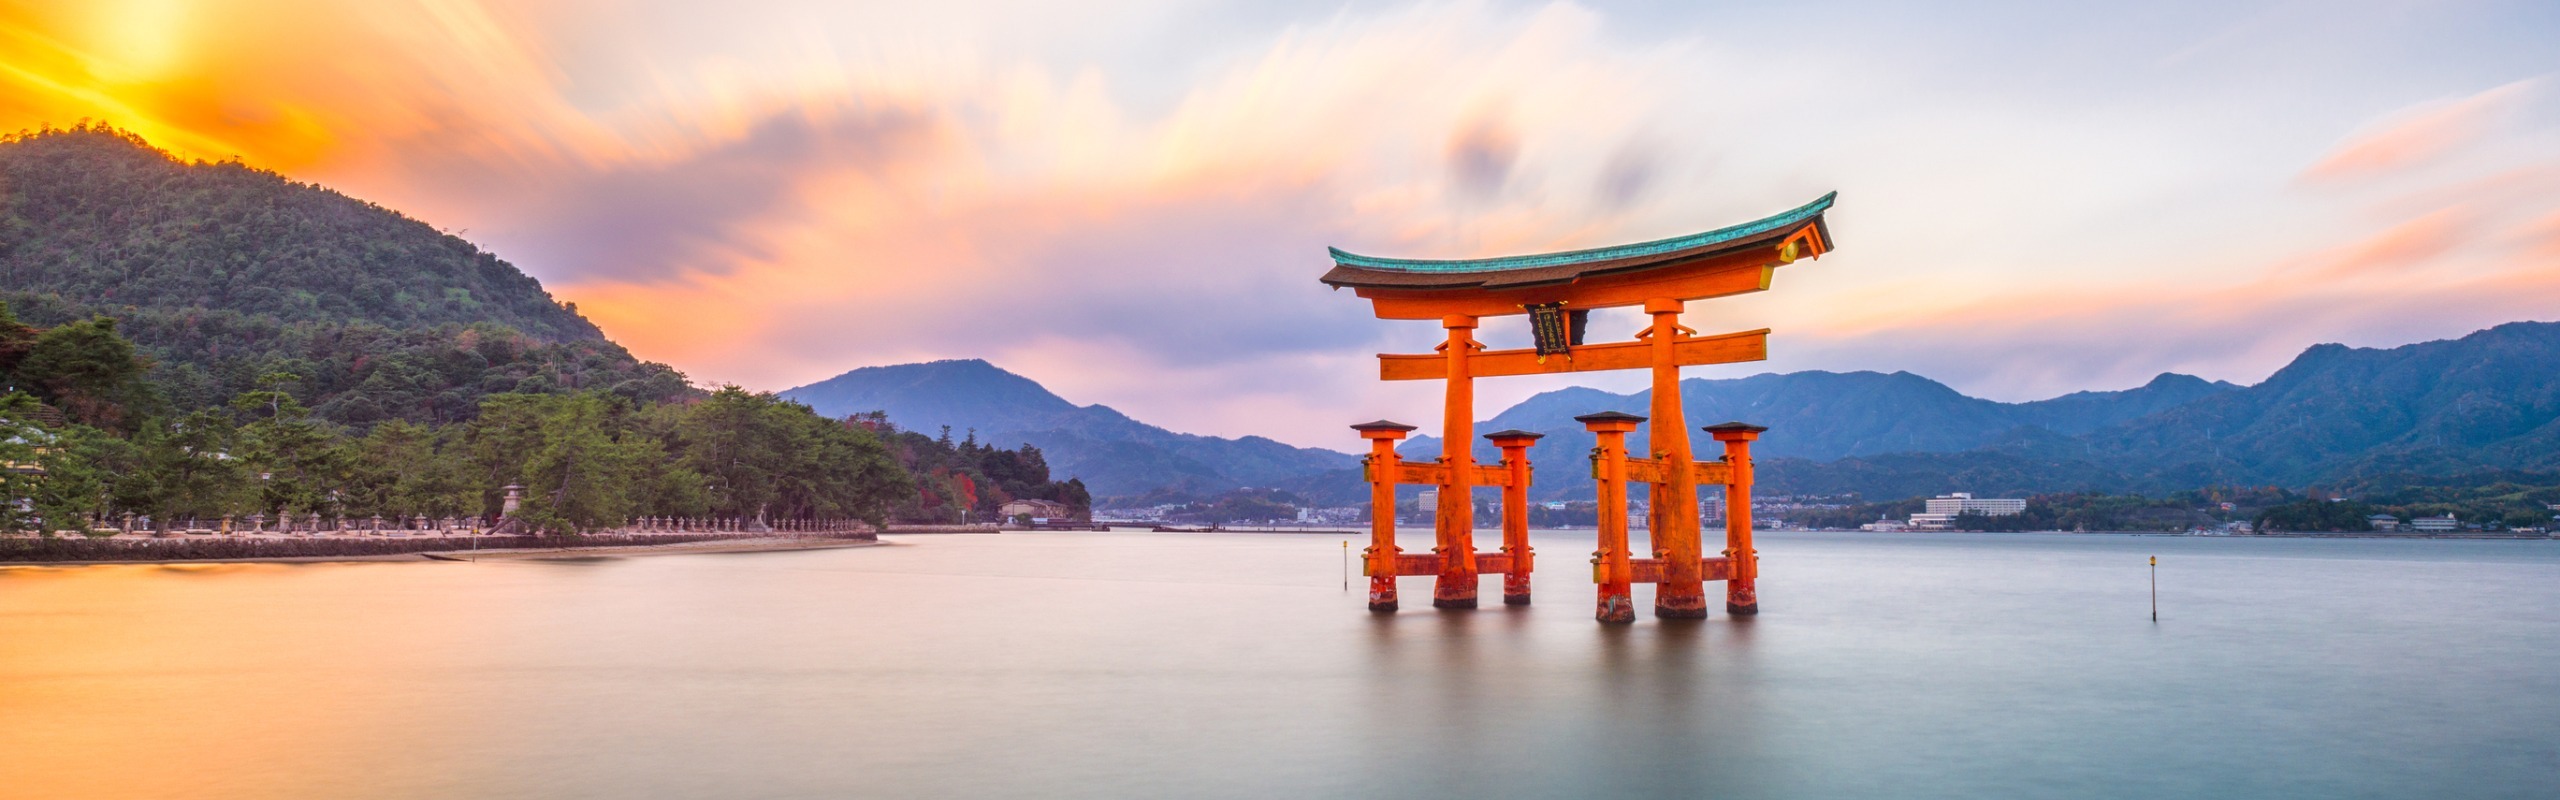 3 Weeks in Japan: Top 3 Itineraries for First Visit 2024/2025